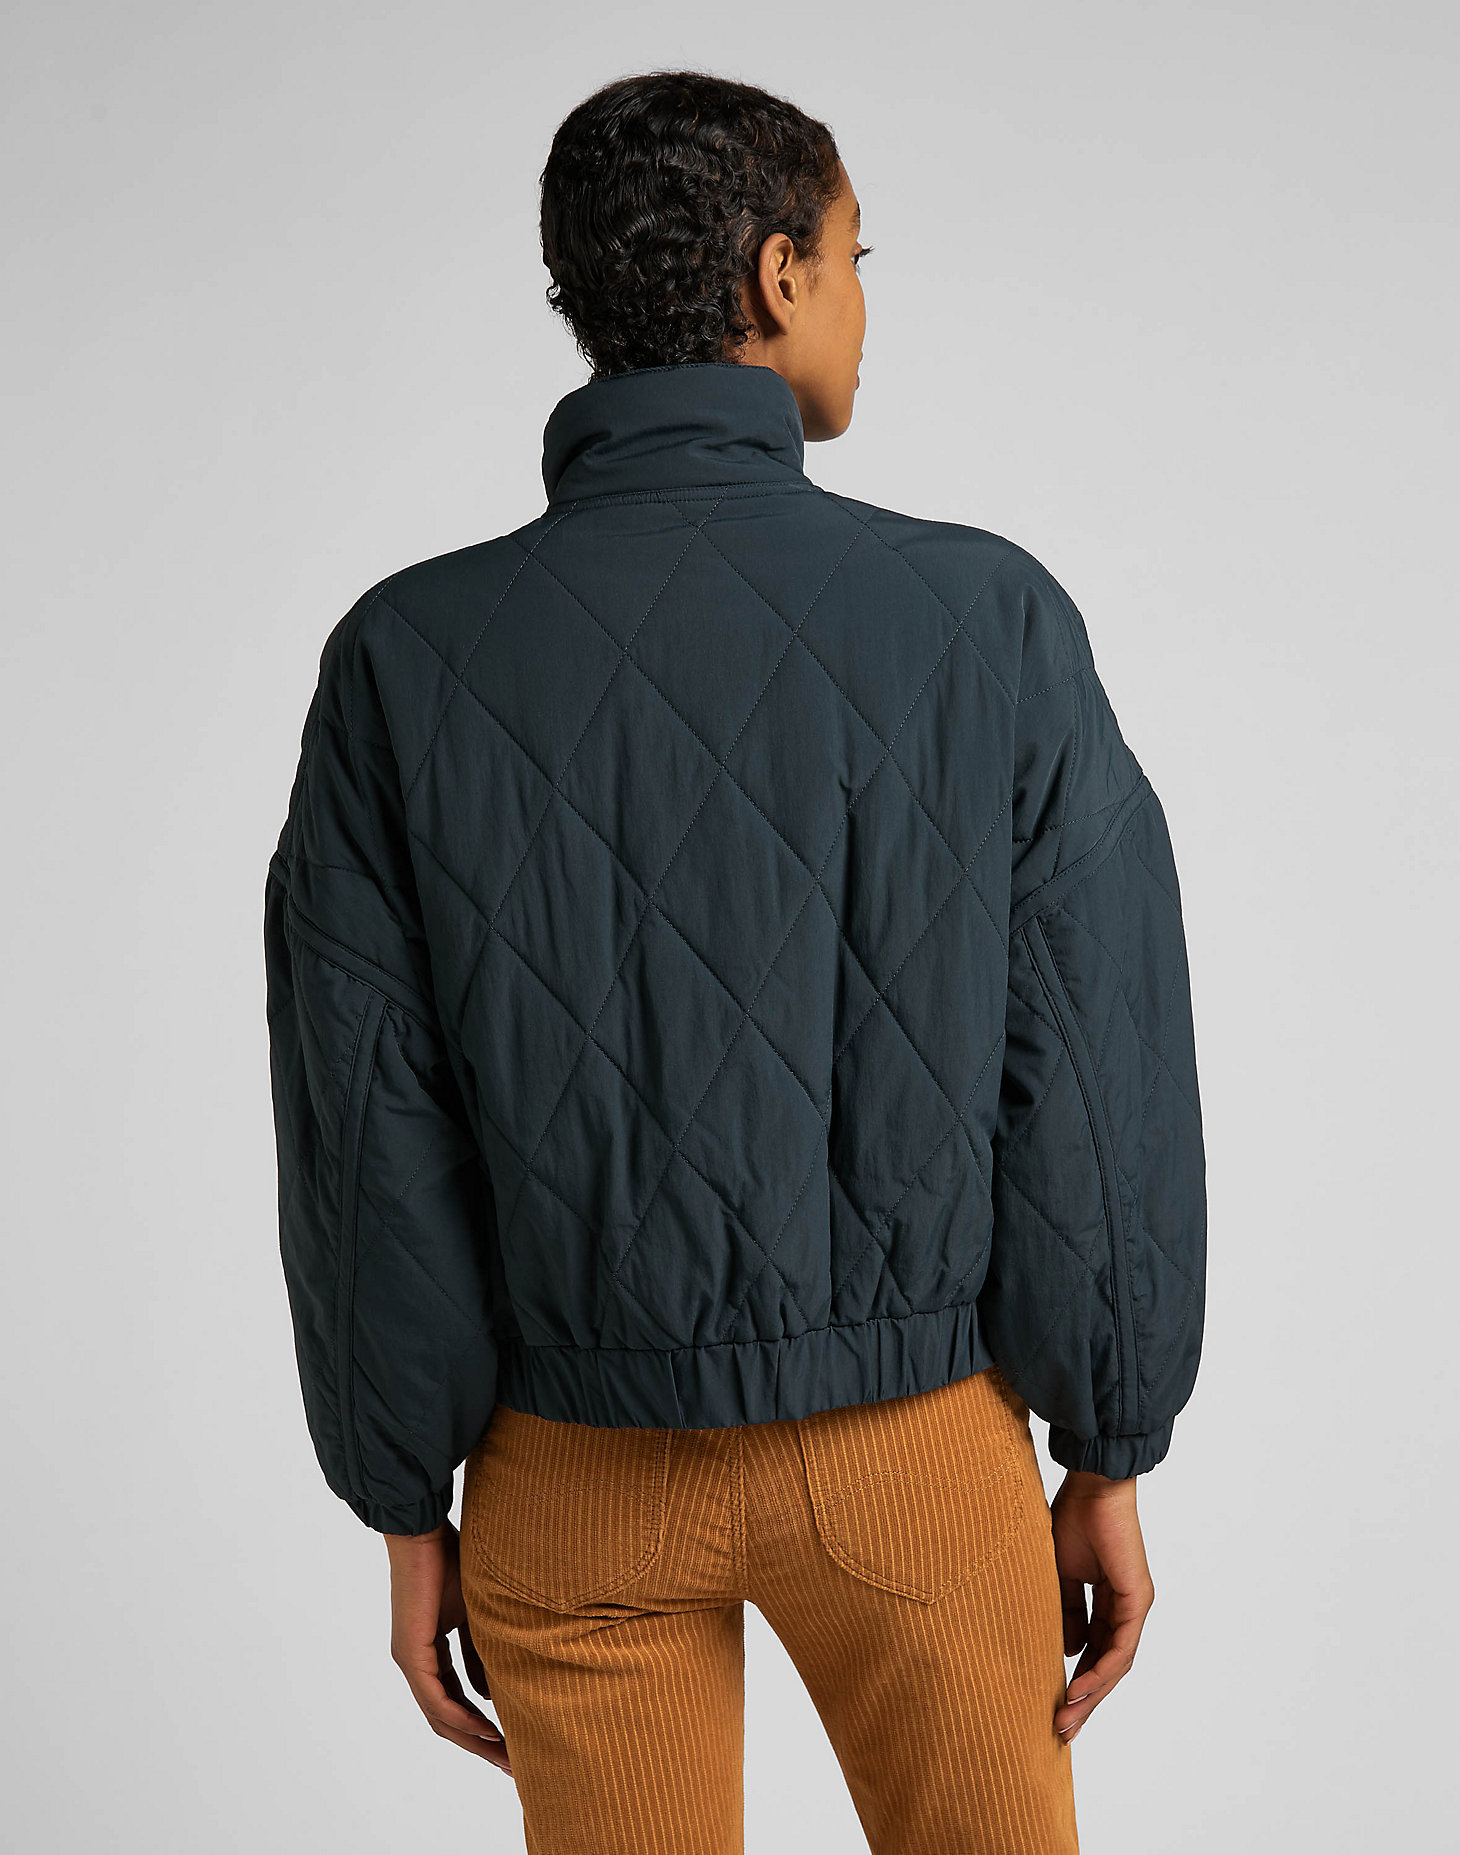 Light Layer Jacket in Charcoal alternative view 1